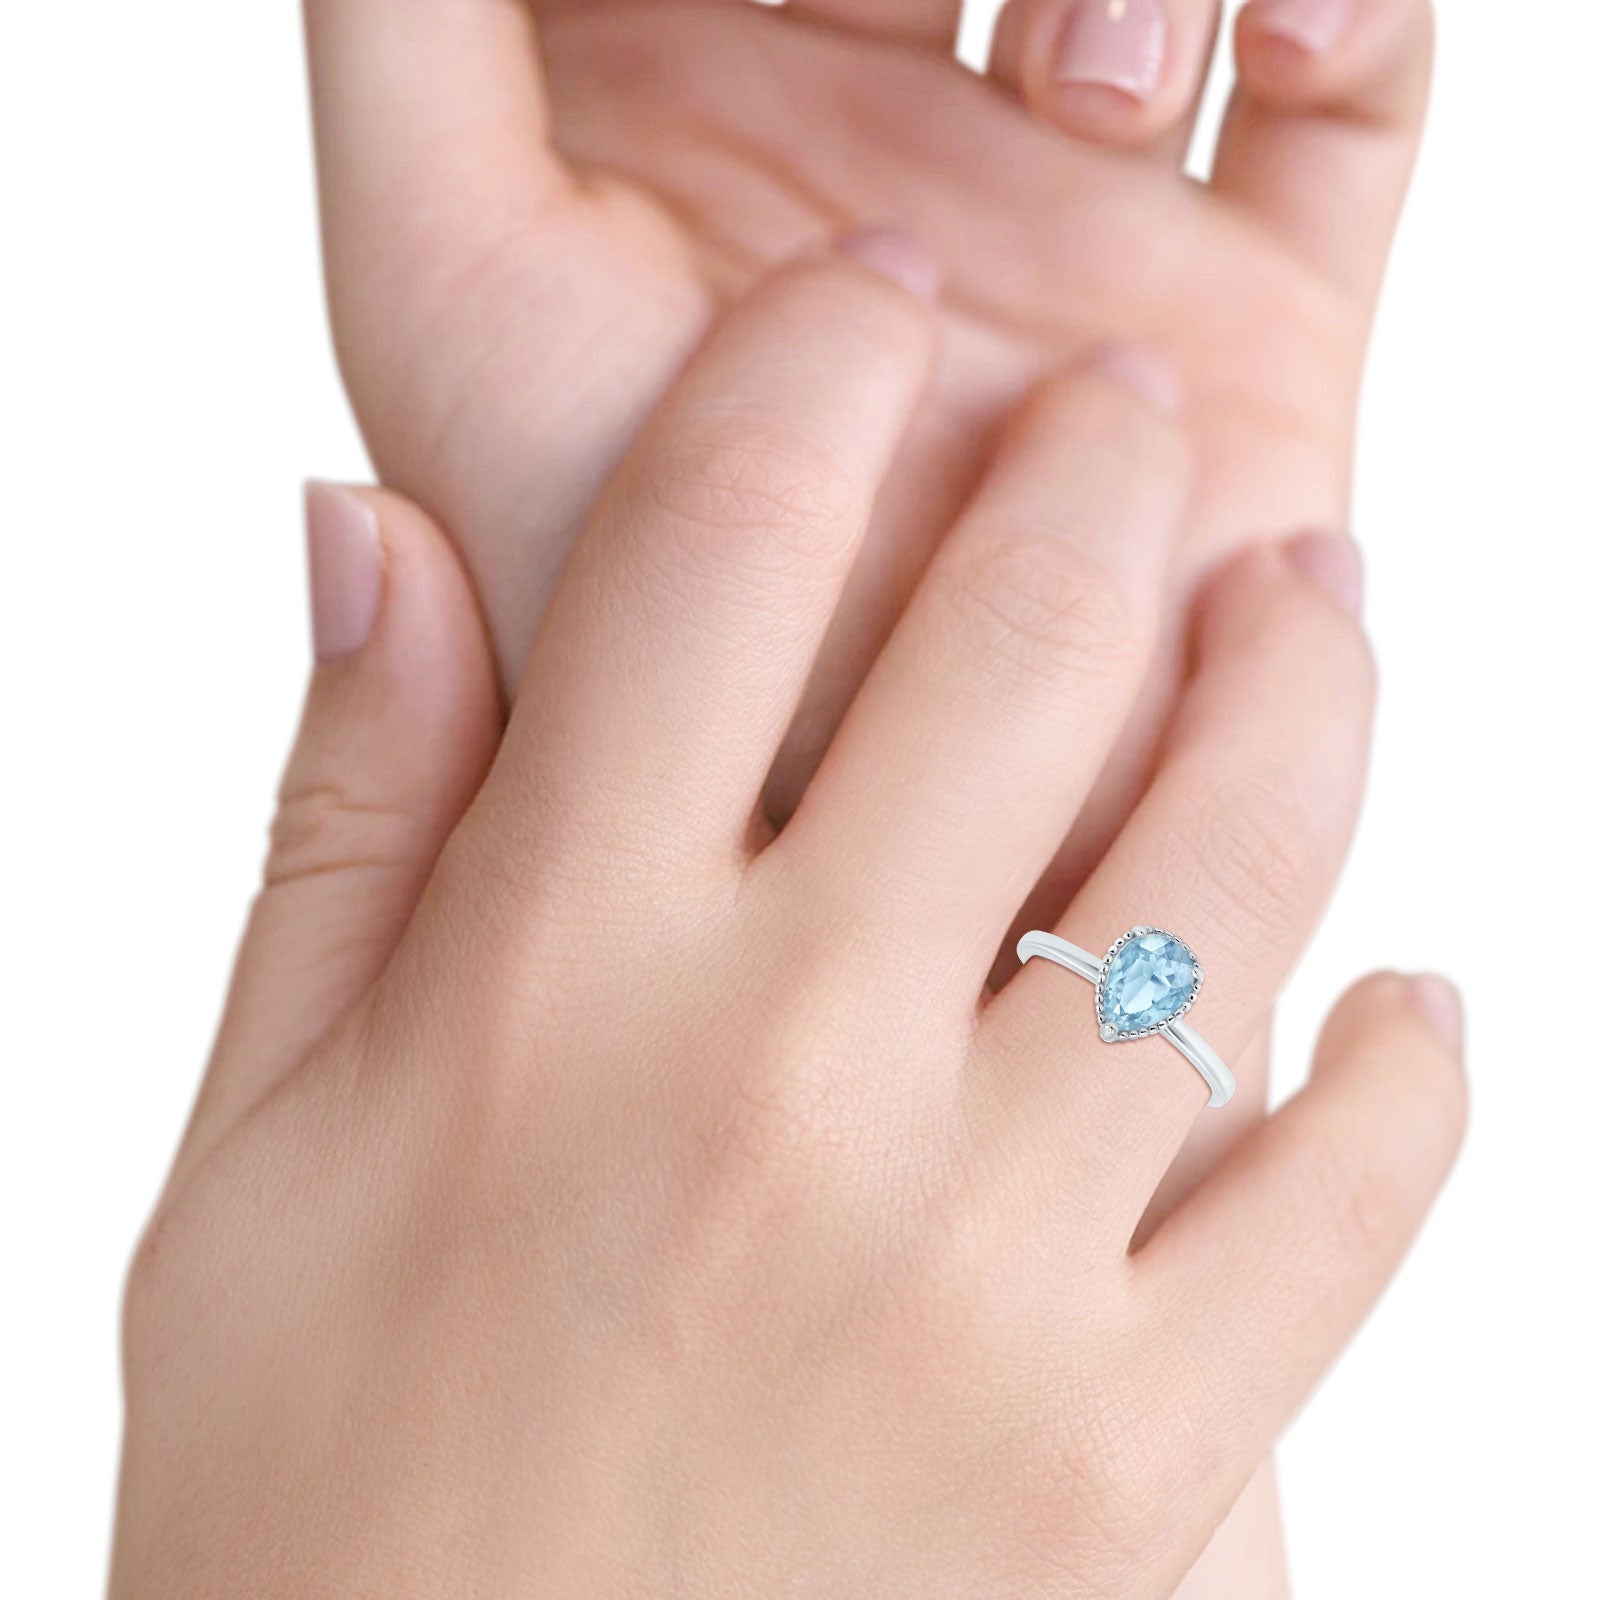 Vintage Style Solitaire Accent Pear Wedding Ring Simulated Aquamarine CZ 925 Sterling Silver